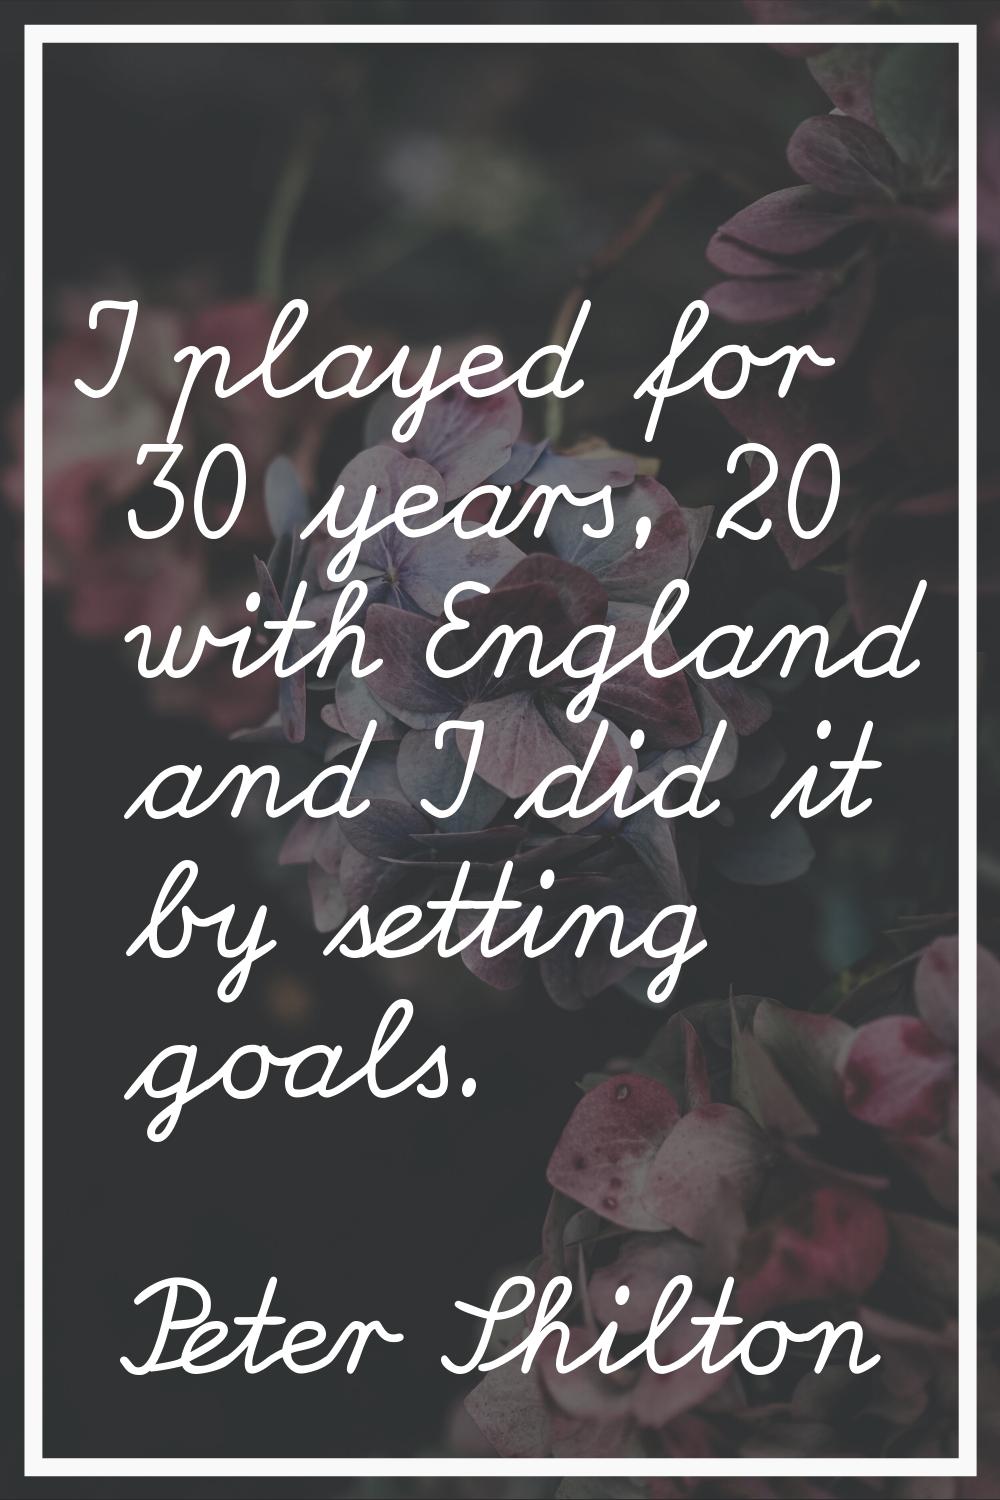 I played for 30 years, 20 with England and I did it by setting goals.